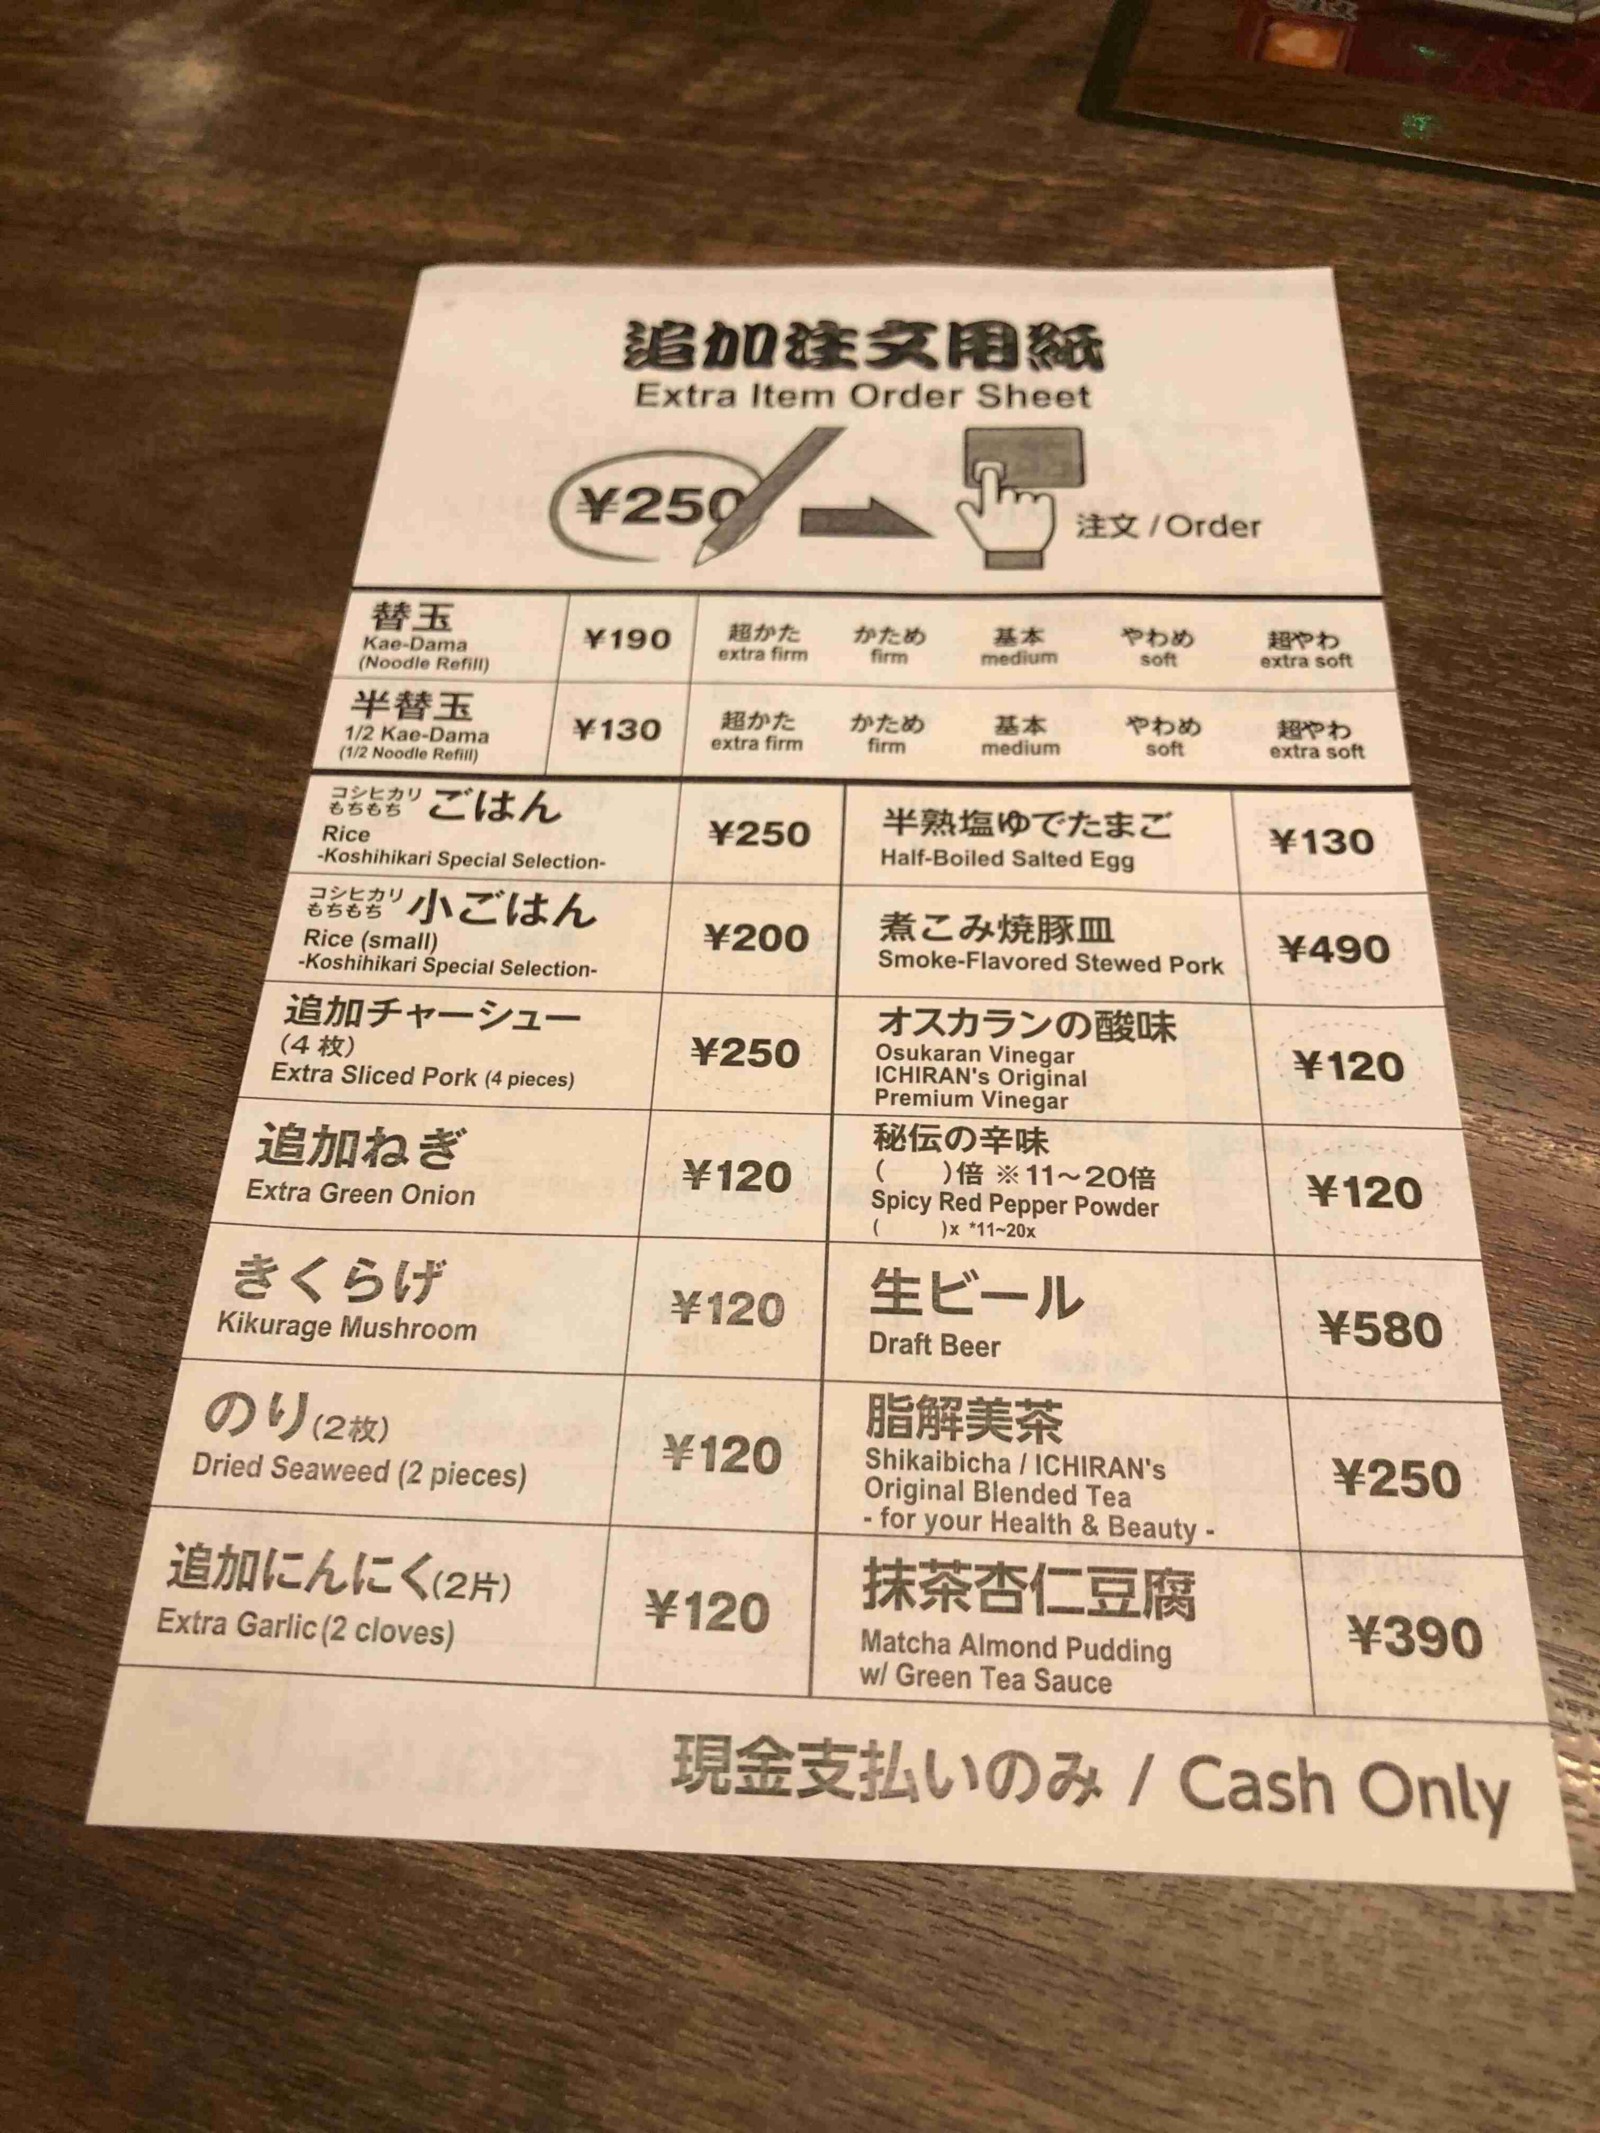 The order sheet for extra items